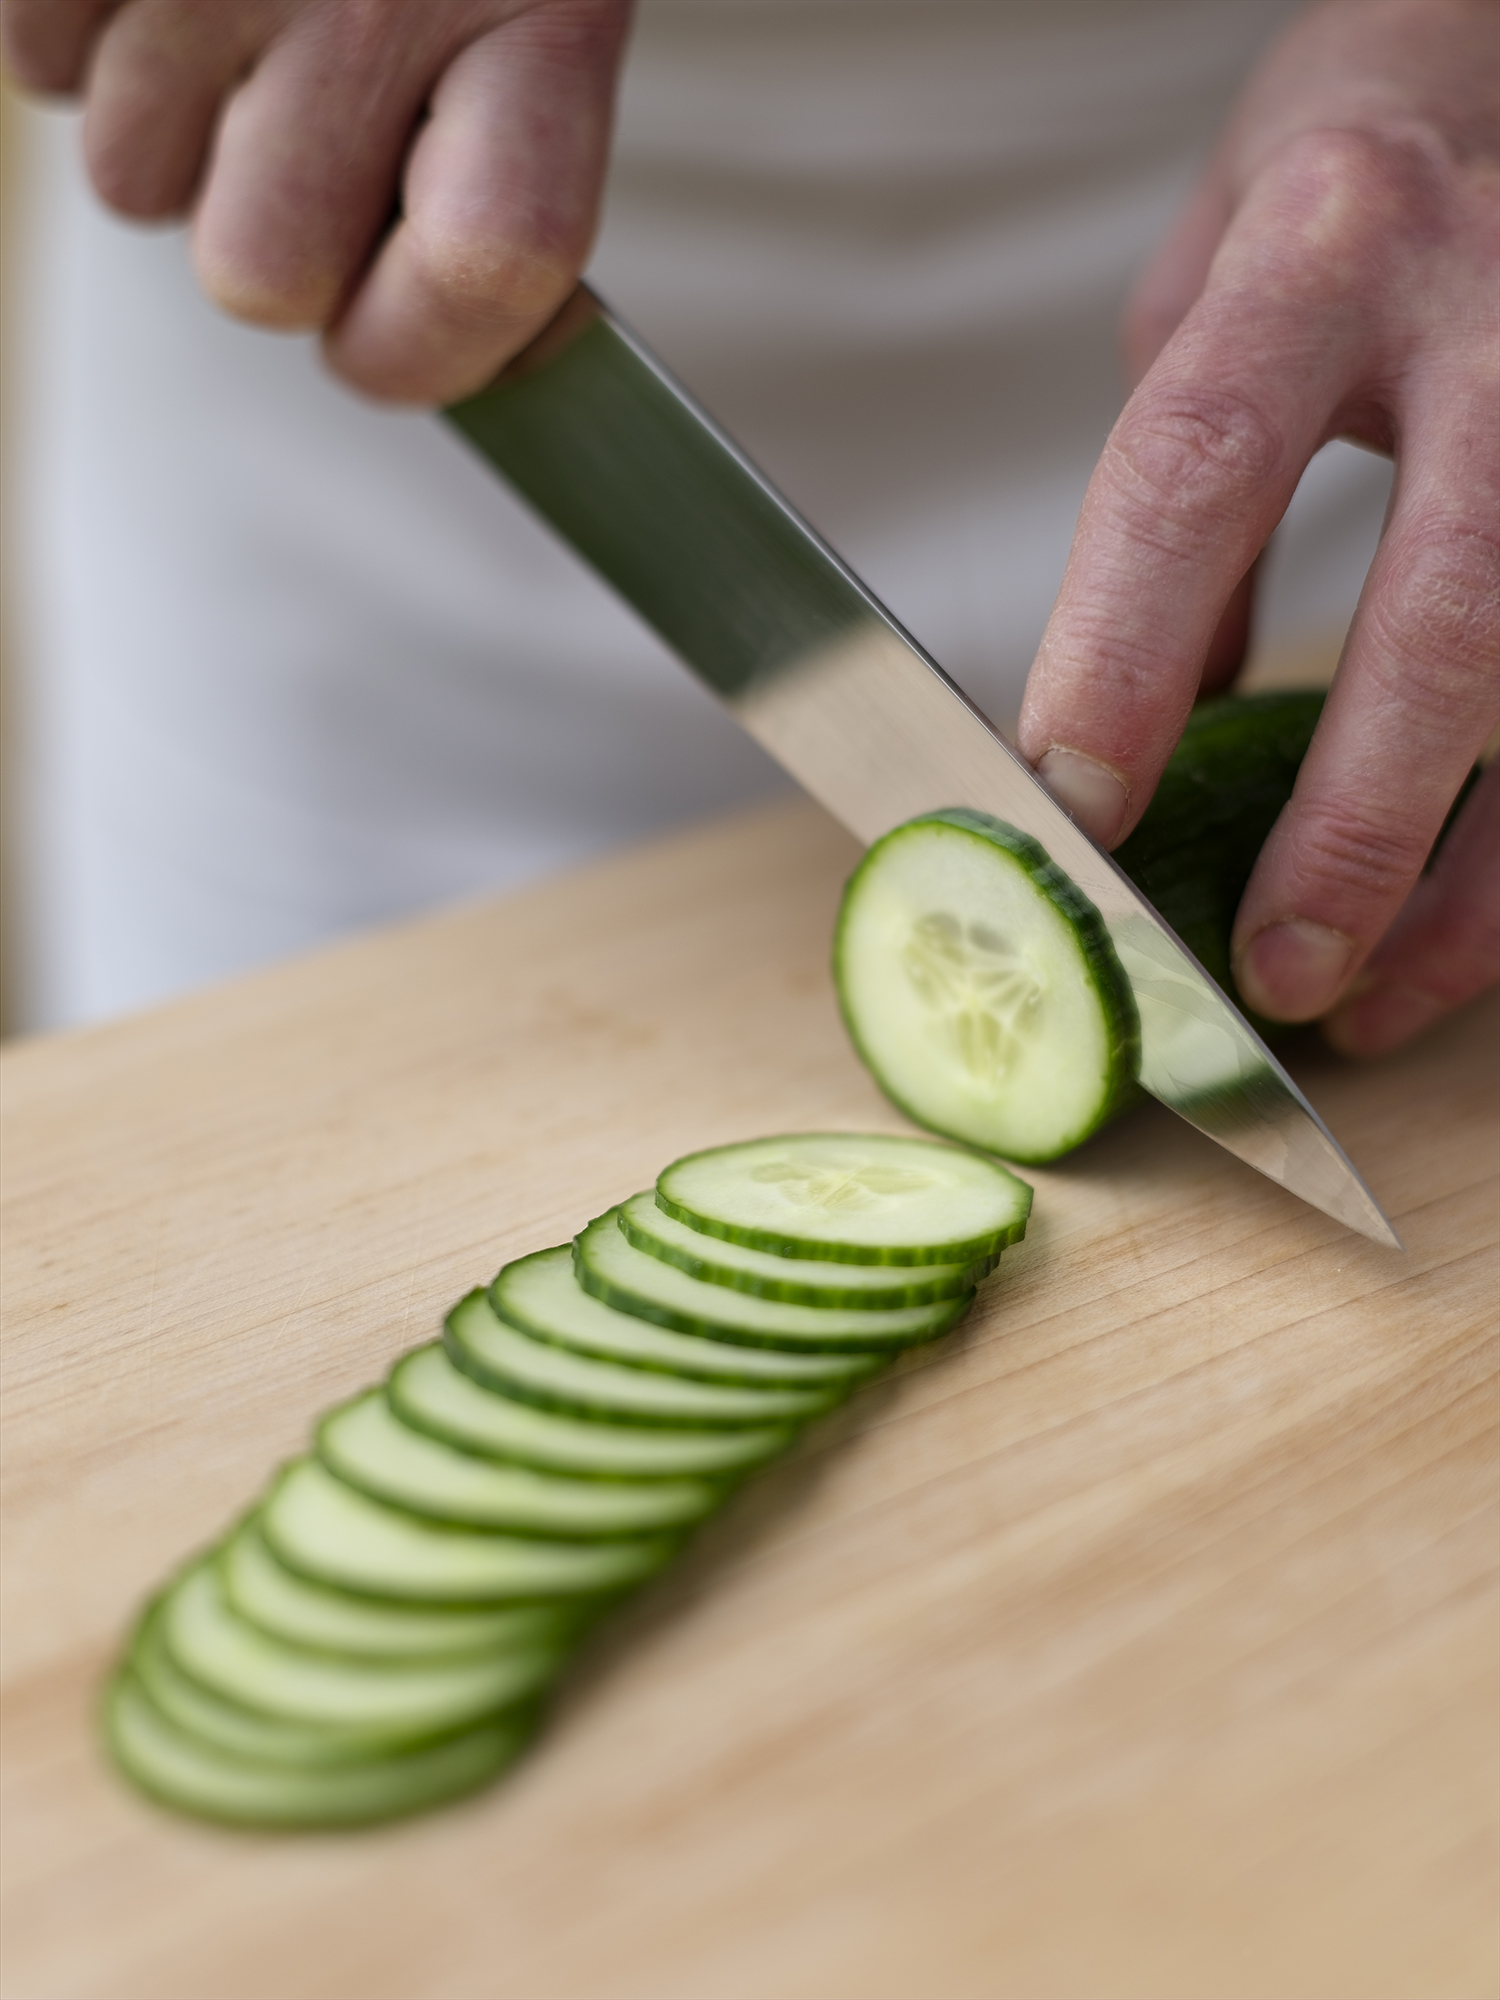 Thinly slicing cucumbers